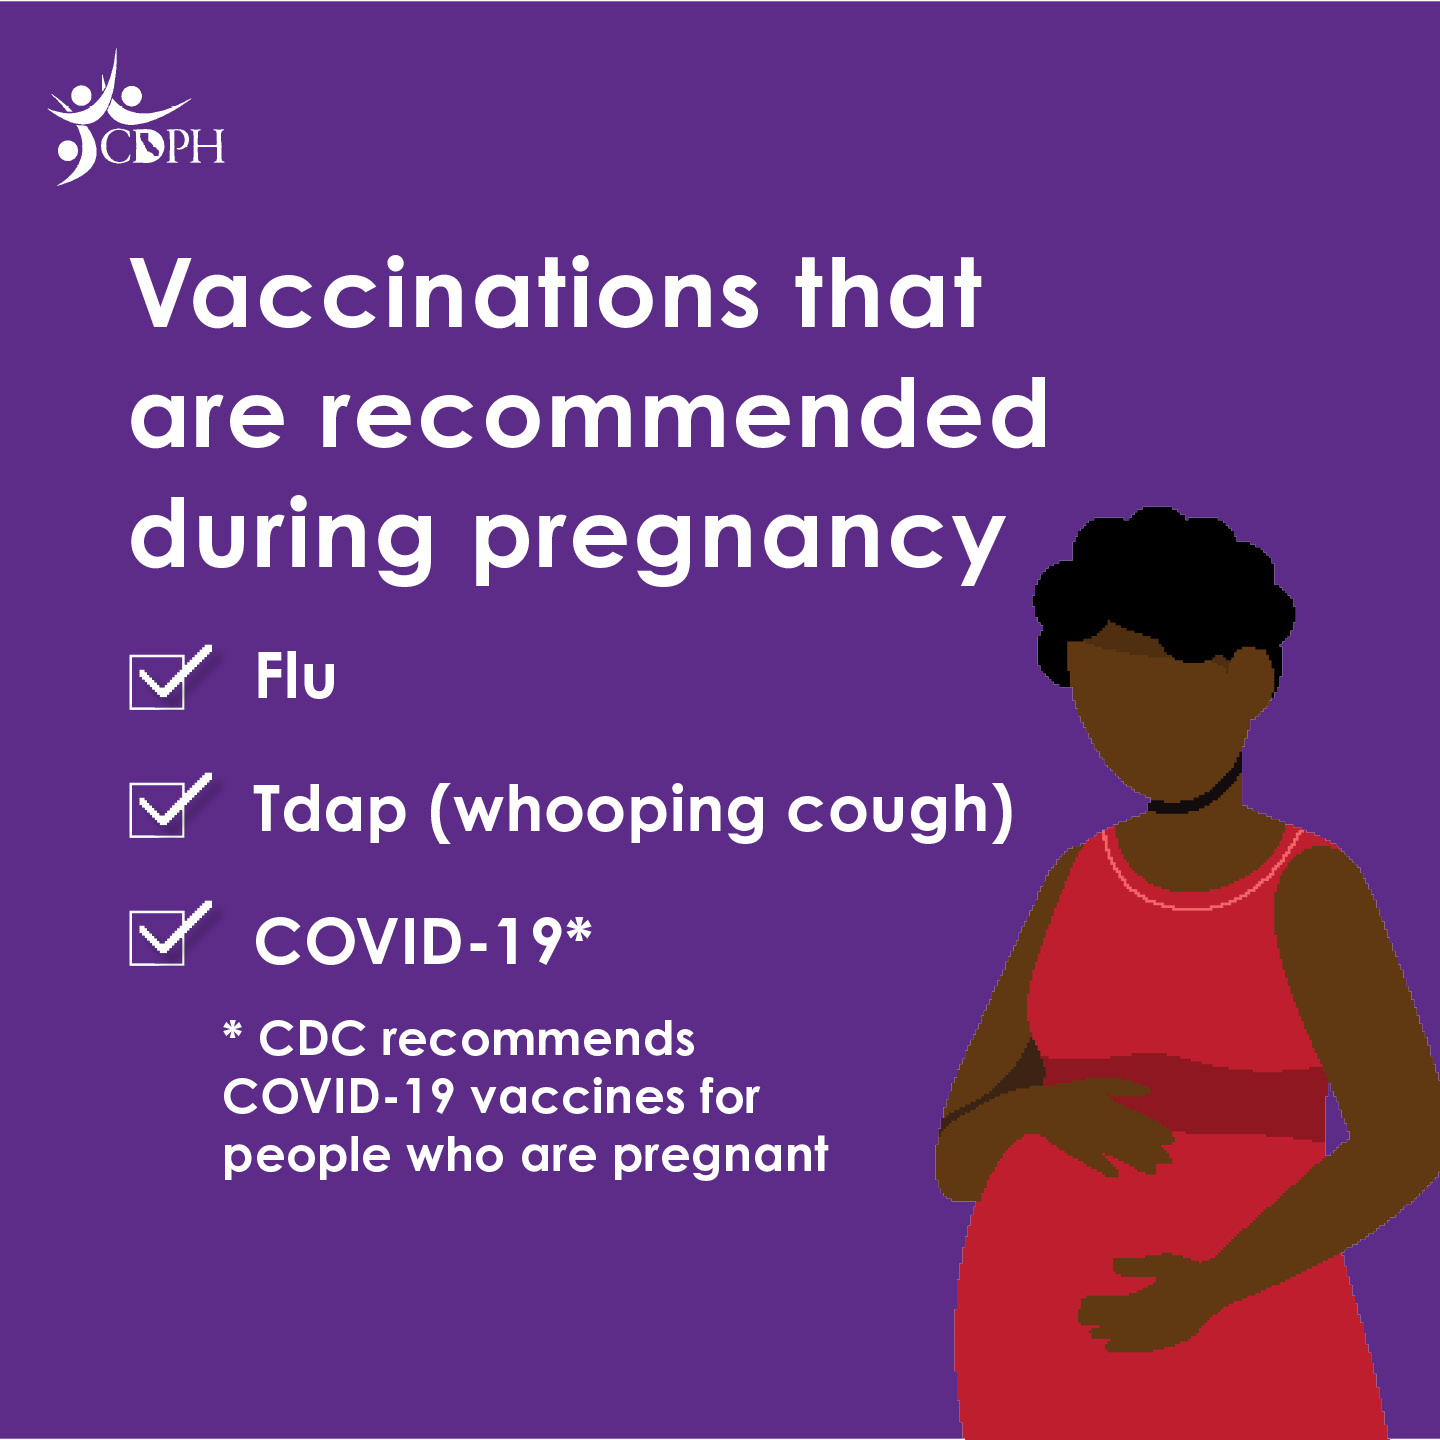 Vaccinations that are recommended during pregnancy. Flu, Tdap, COVID-19